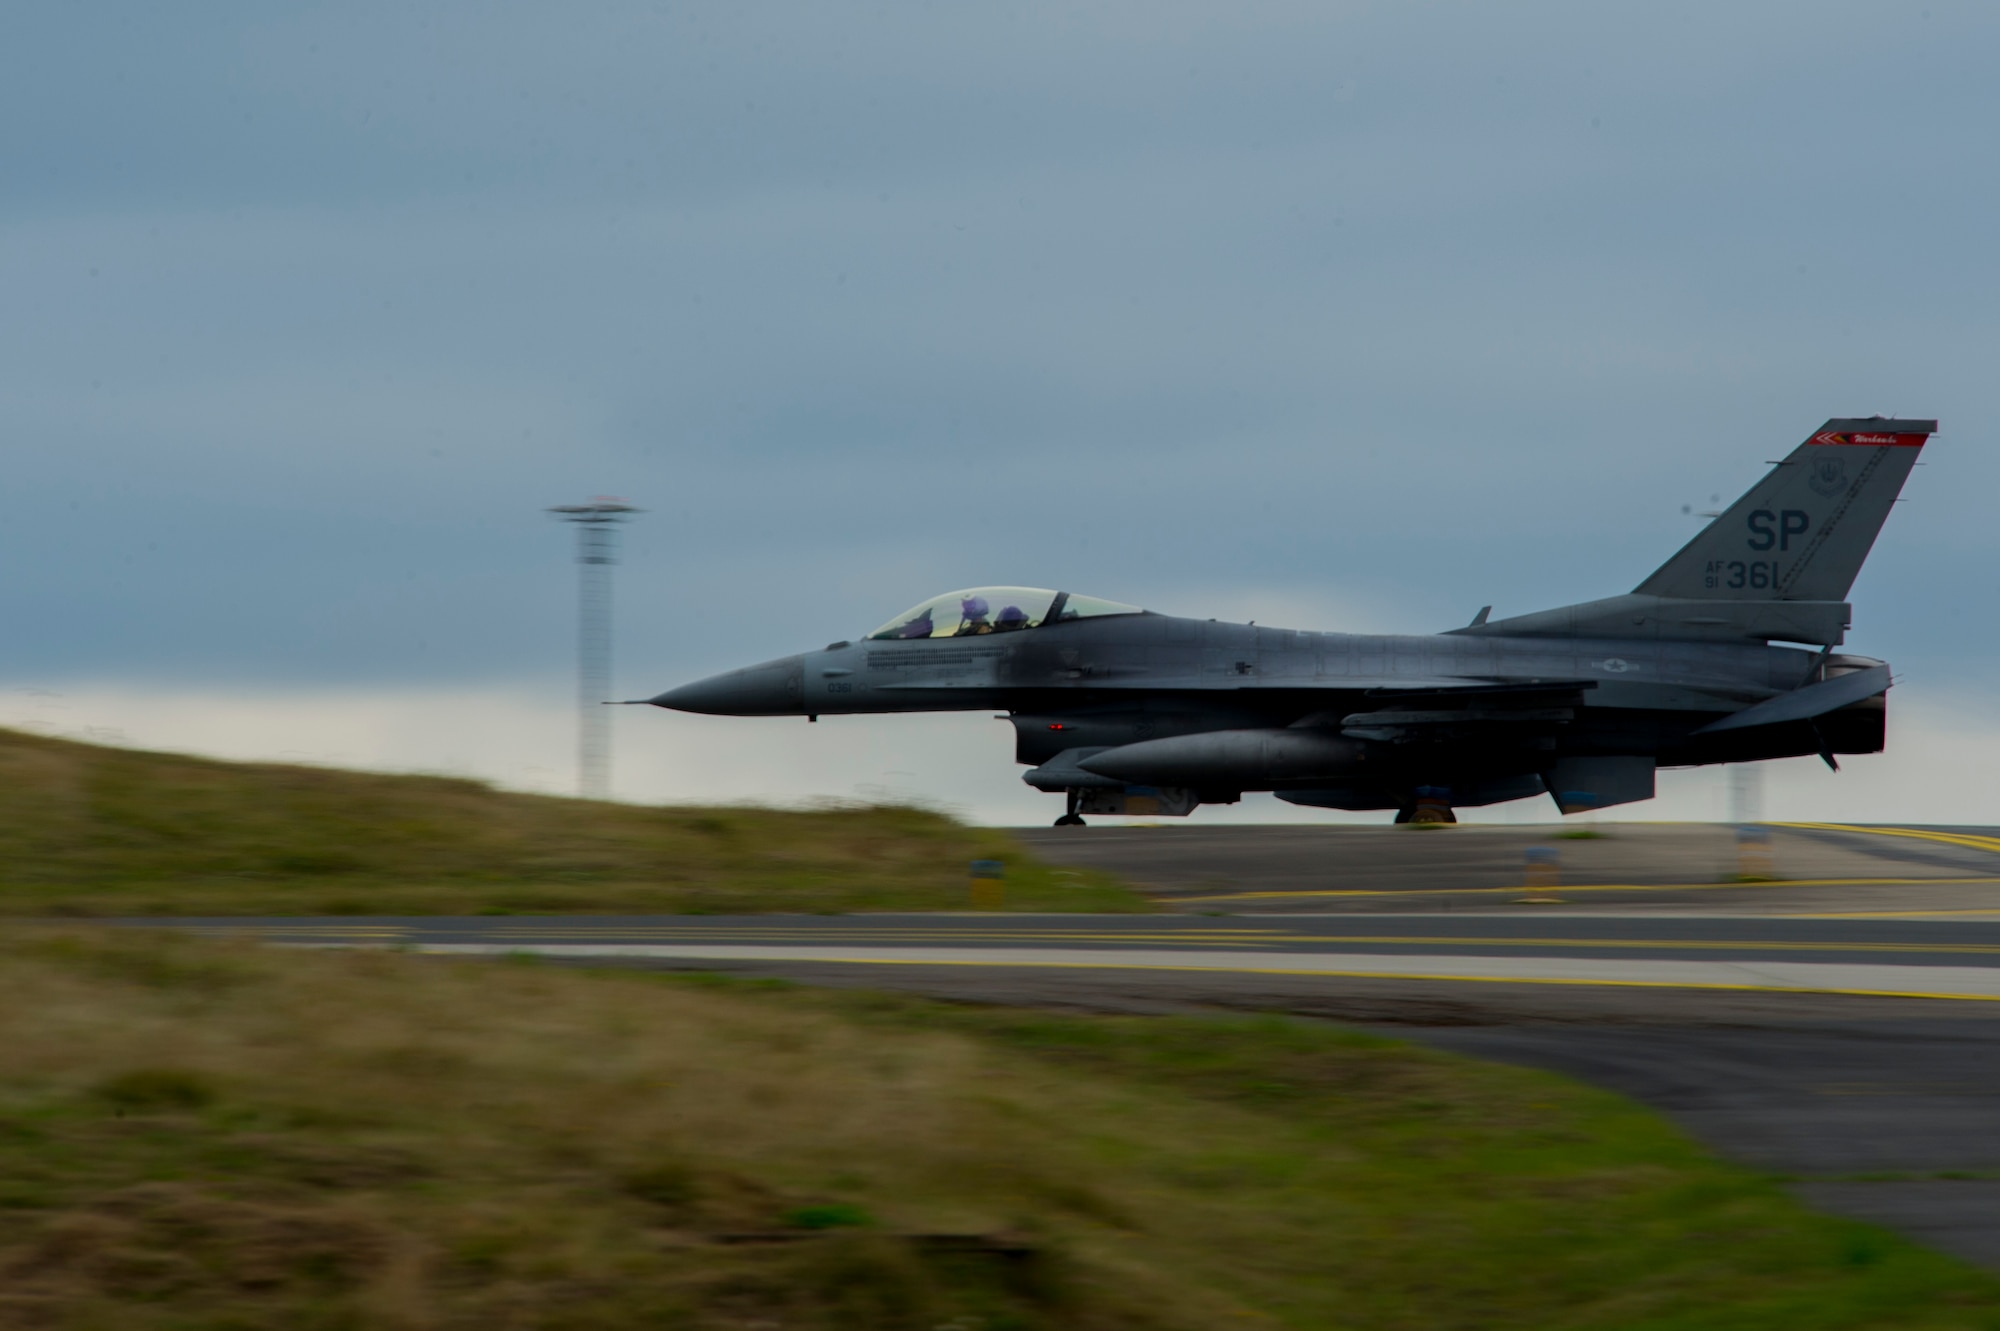 An F-16 Fighting Falcon fighter aircraft assigned to the 480th Expeditionary Fighter Squadron lands on the flightline during the squadron’s return to Spangdahlem Air Base, Germany, Oct. 6, 2016. Approximately 300 of the Airmen, who serve in flight, maintenance or support roles for the F-16, completed a six-month deployment to Southwest Asia by providing close air support and dynamic targeting operations as part of the squadron’s first deployment in support of Operation Inherent Resolve. Operation Inherent Resolve aims to eliminate the Da'esh terrorist group and the threat they pose to Iraq, Syria and the wider international community. (U.S. Air Force photo by Staff Sgt. Joe W. McFadden)